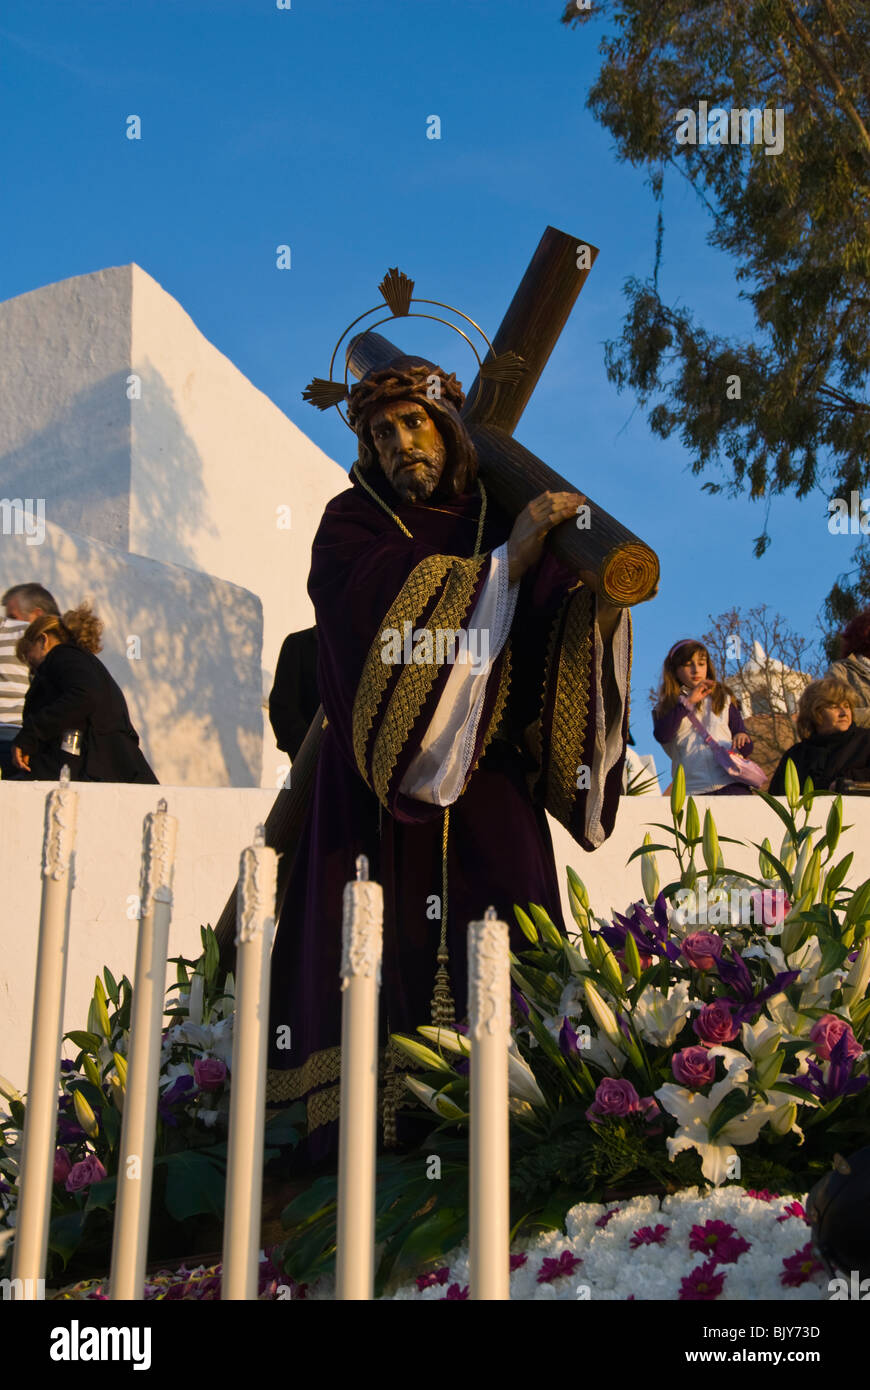 Images carried on the Good Friday easter procession, Ibiza, Spain Stock Photo